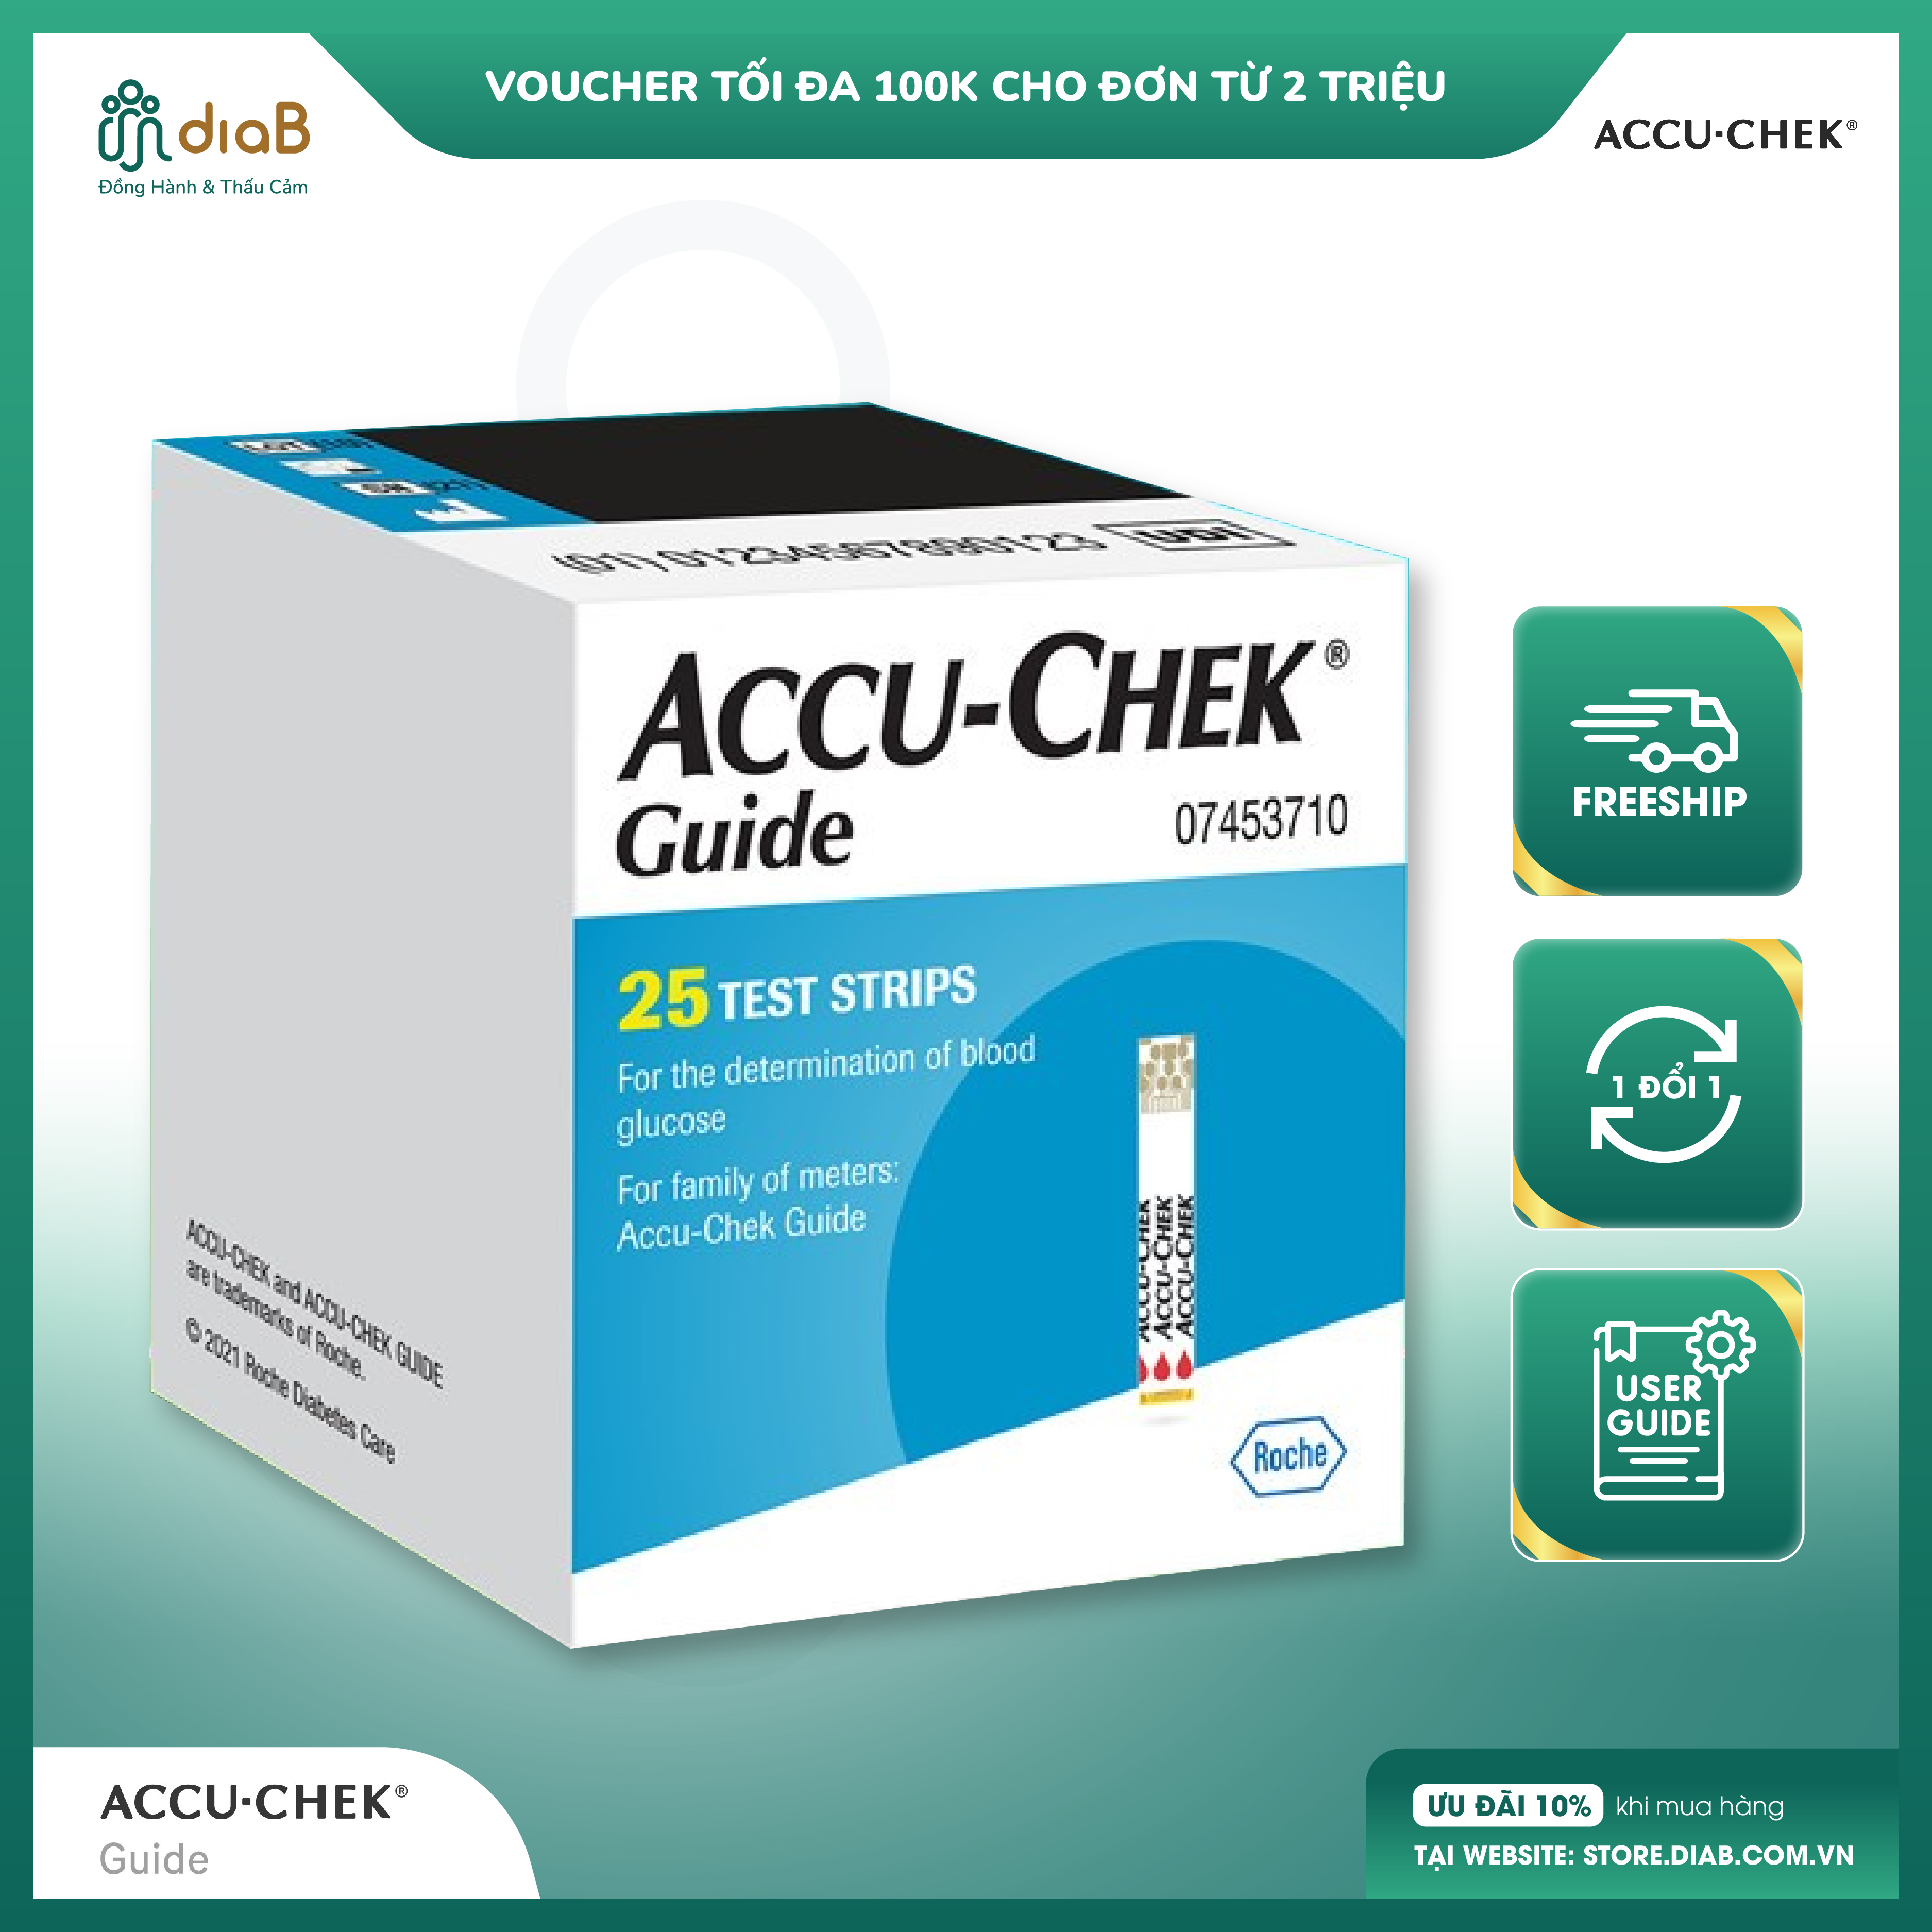 blood glucose test strips for colloidal accu-chek monitor Guide